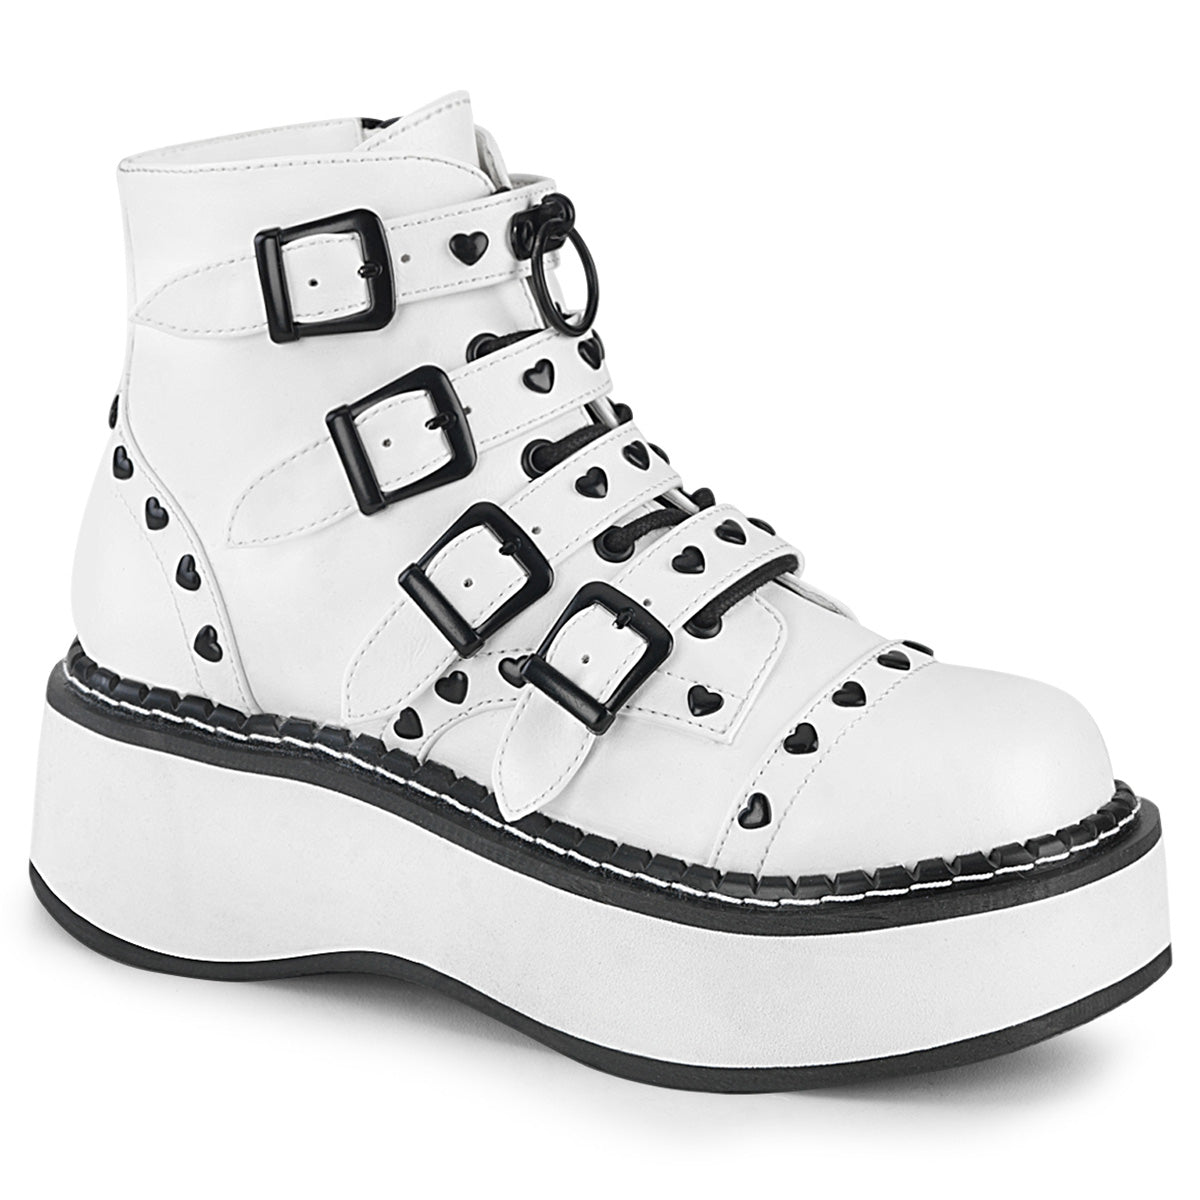 DemoniaCult Womens Ankle Boots EMILY-315 White Vegan Leather